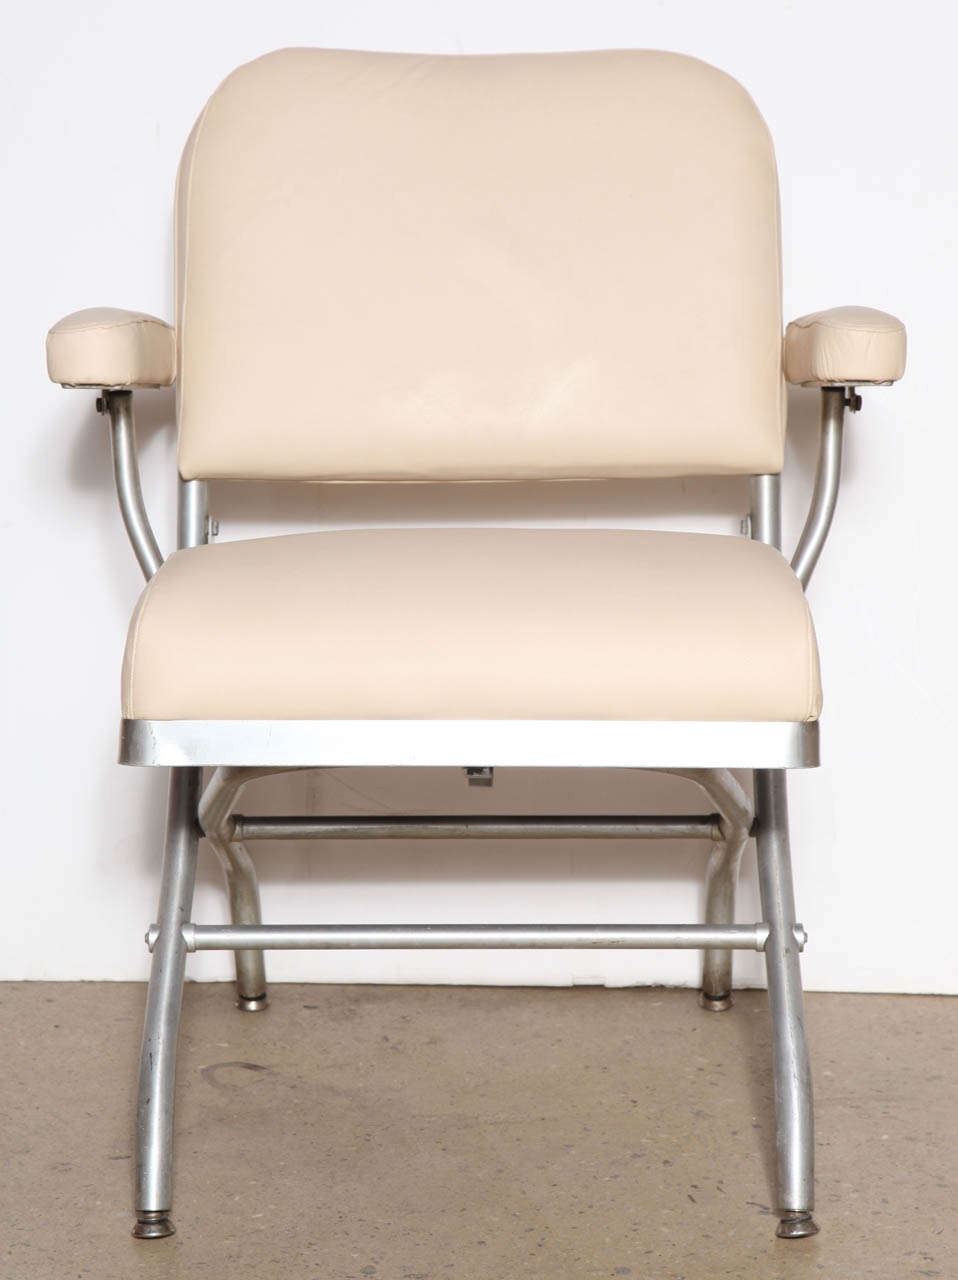 Super comfortable Warren McArthur for Mayfair Industries, Yonkers, NY. Aluminum and leather folding chair. Featuring a supportive tubular aluminum frame, newly reupholstered in vanilla and cream leather. Great portable chair.
Nice occasional